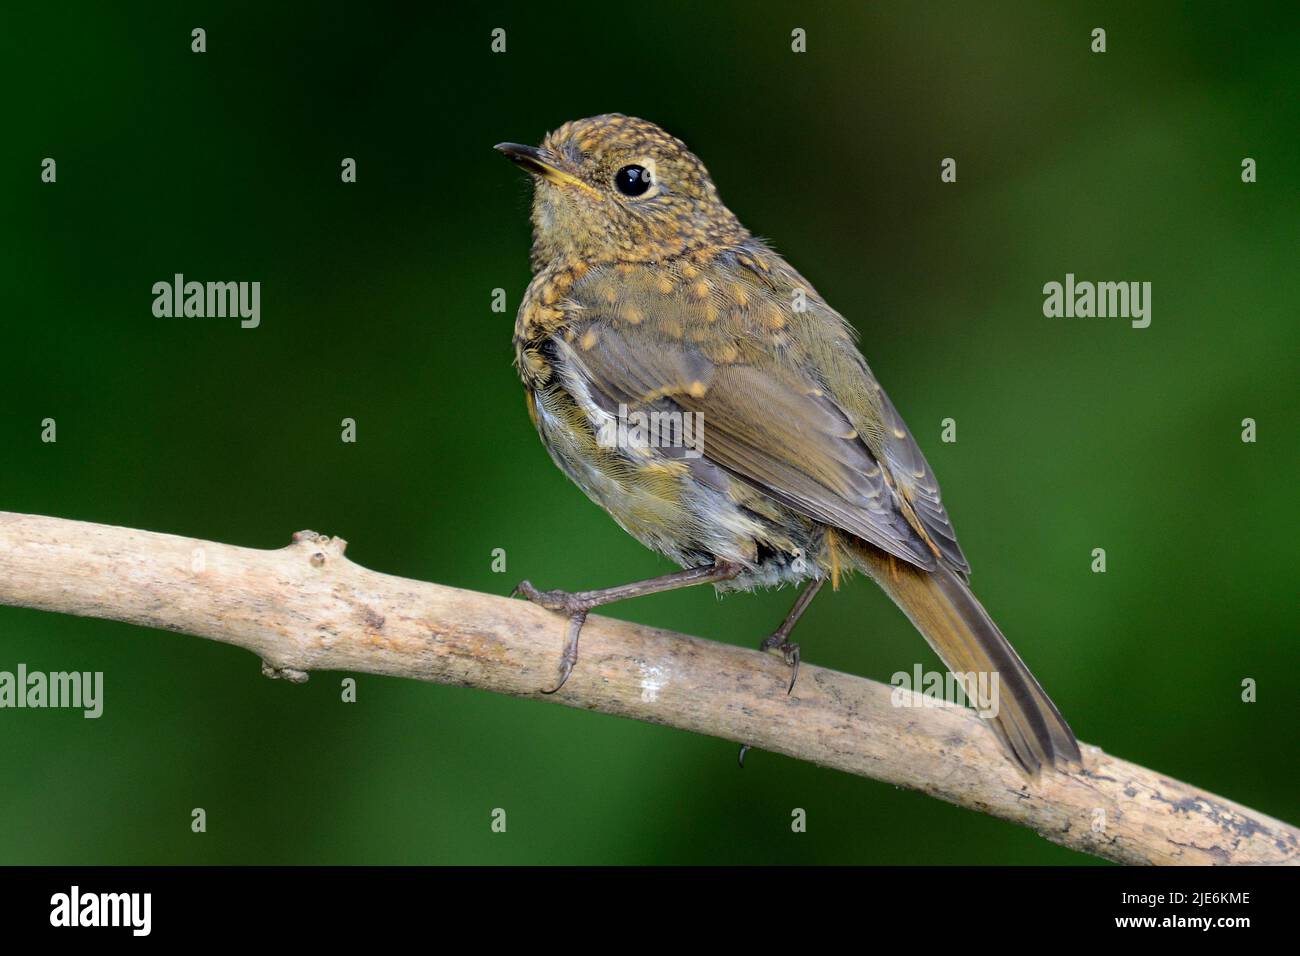 Fledgling robin at rest perched on thin branch Stock Photo